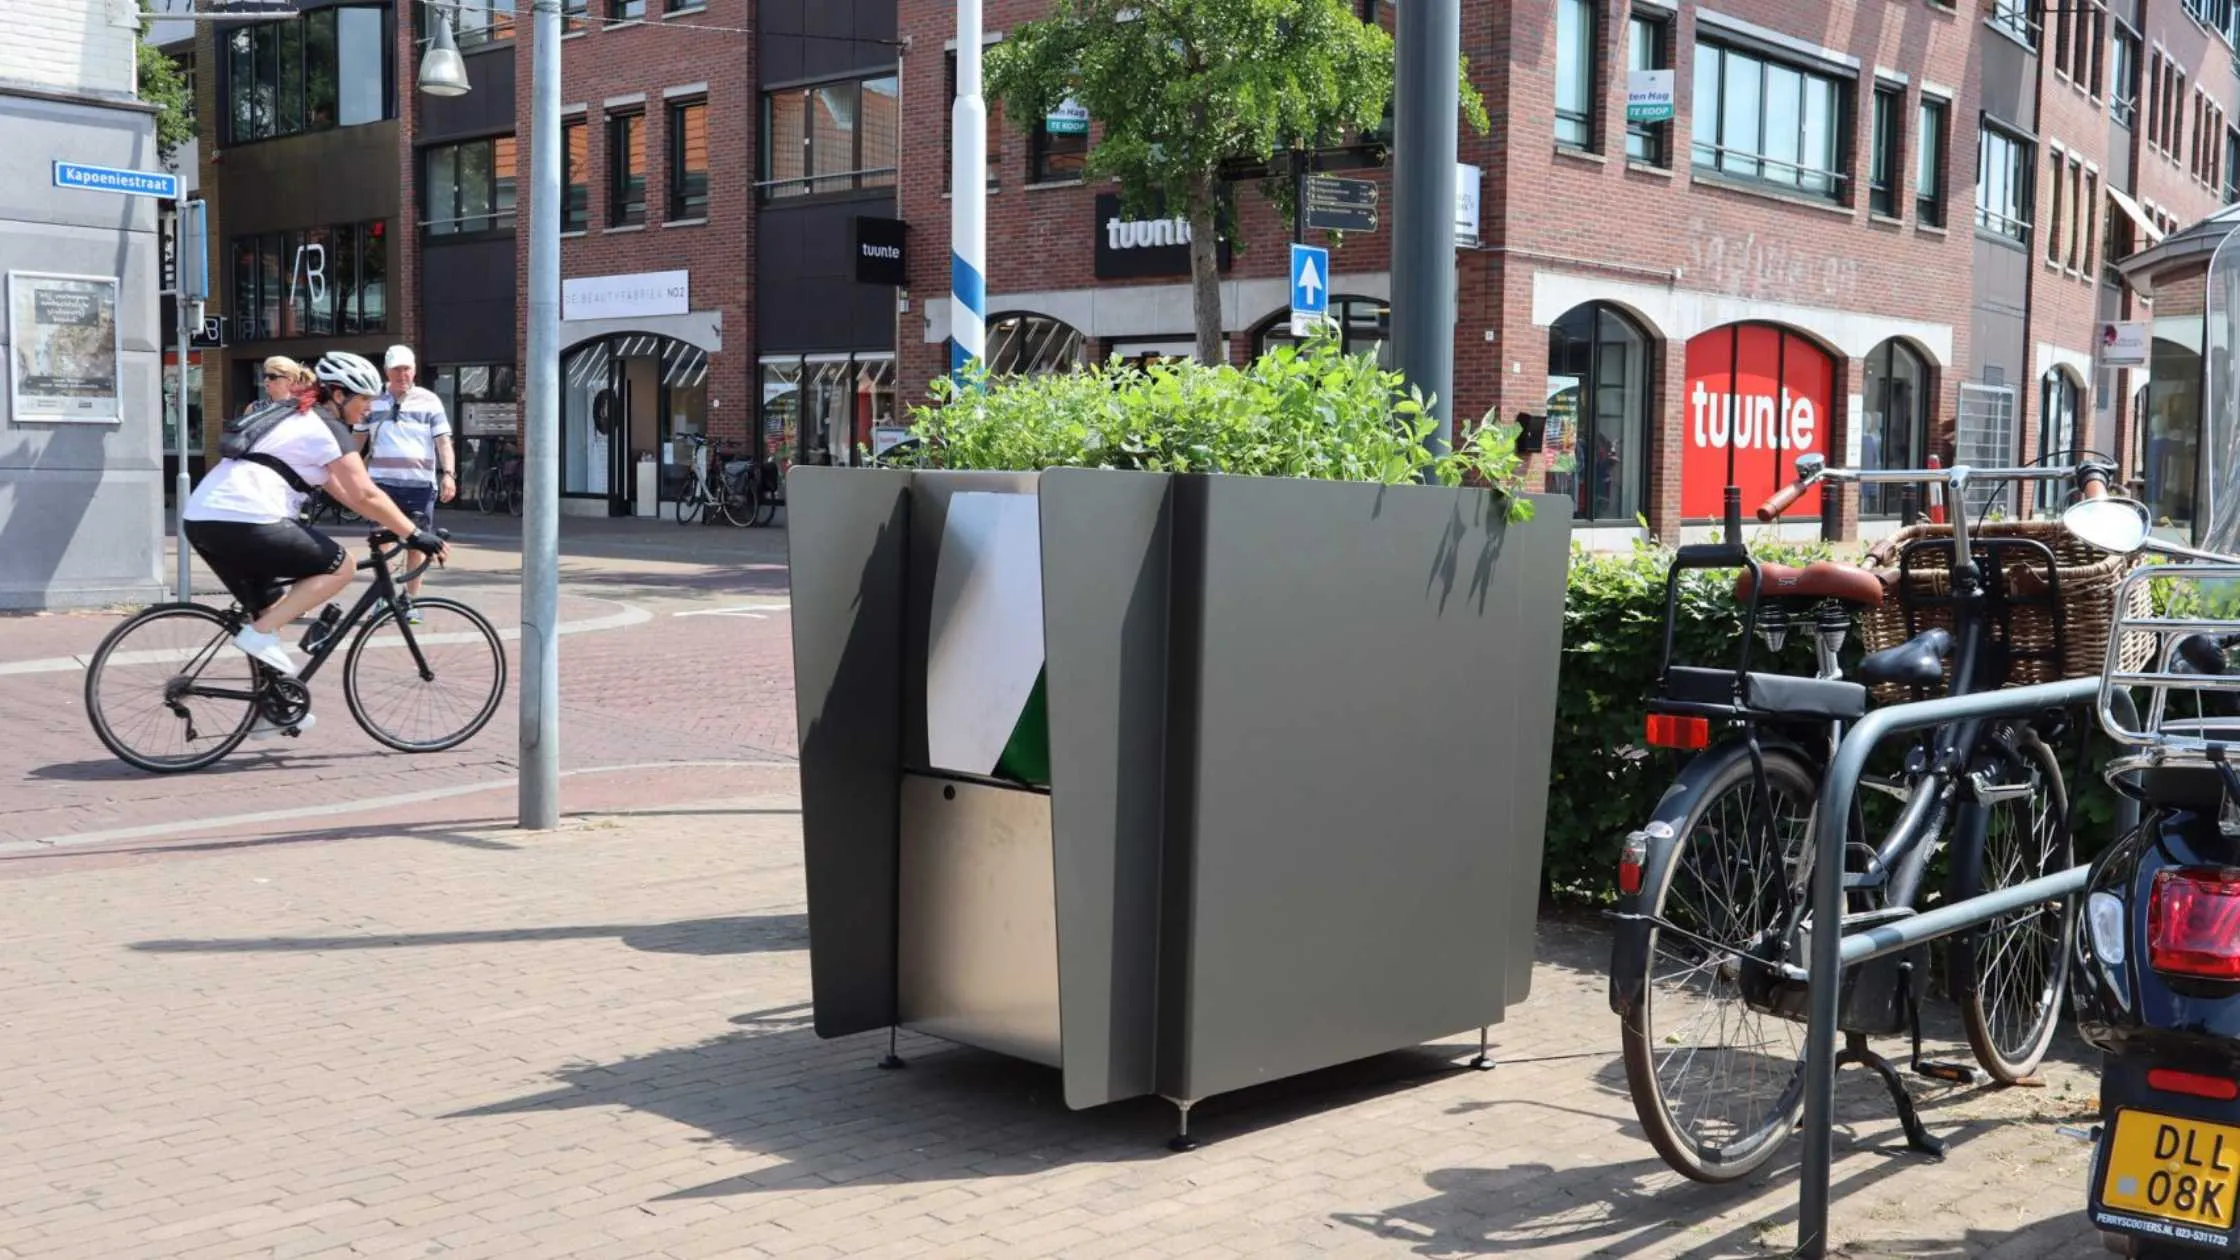 GreenPee Company Installs Hemp-Based Urinals in Amsterdam to Put an Halt to “Wild Peeing”